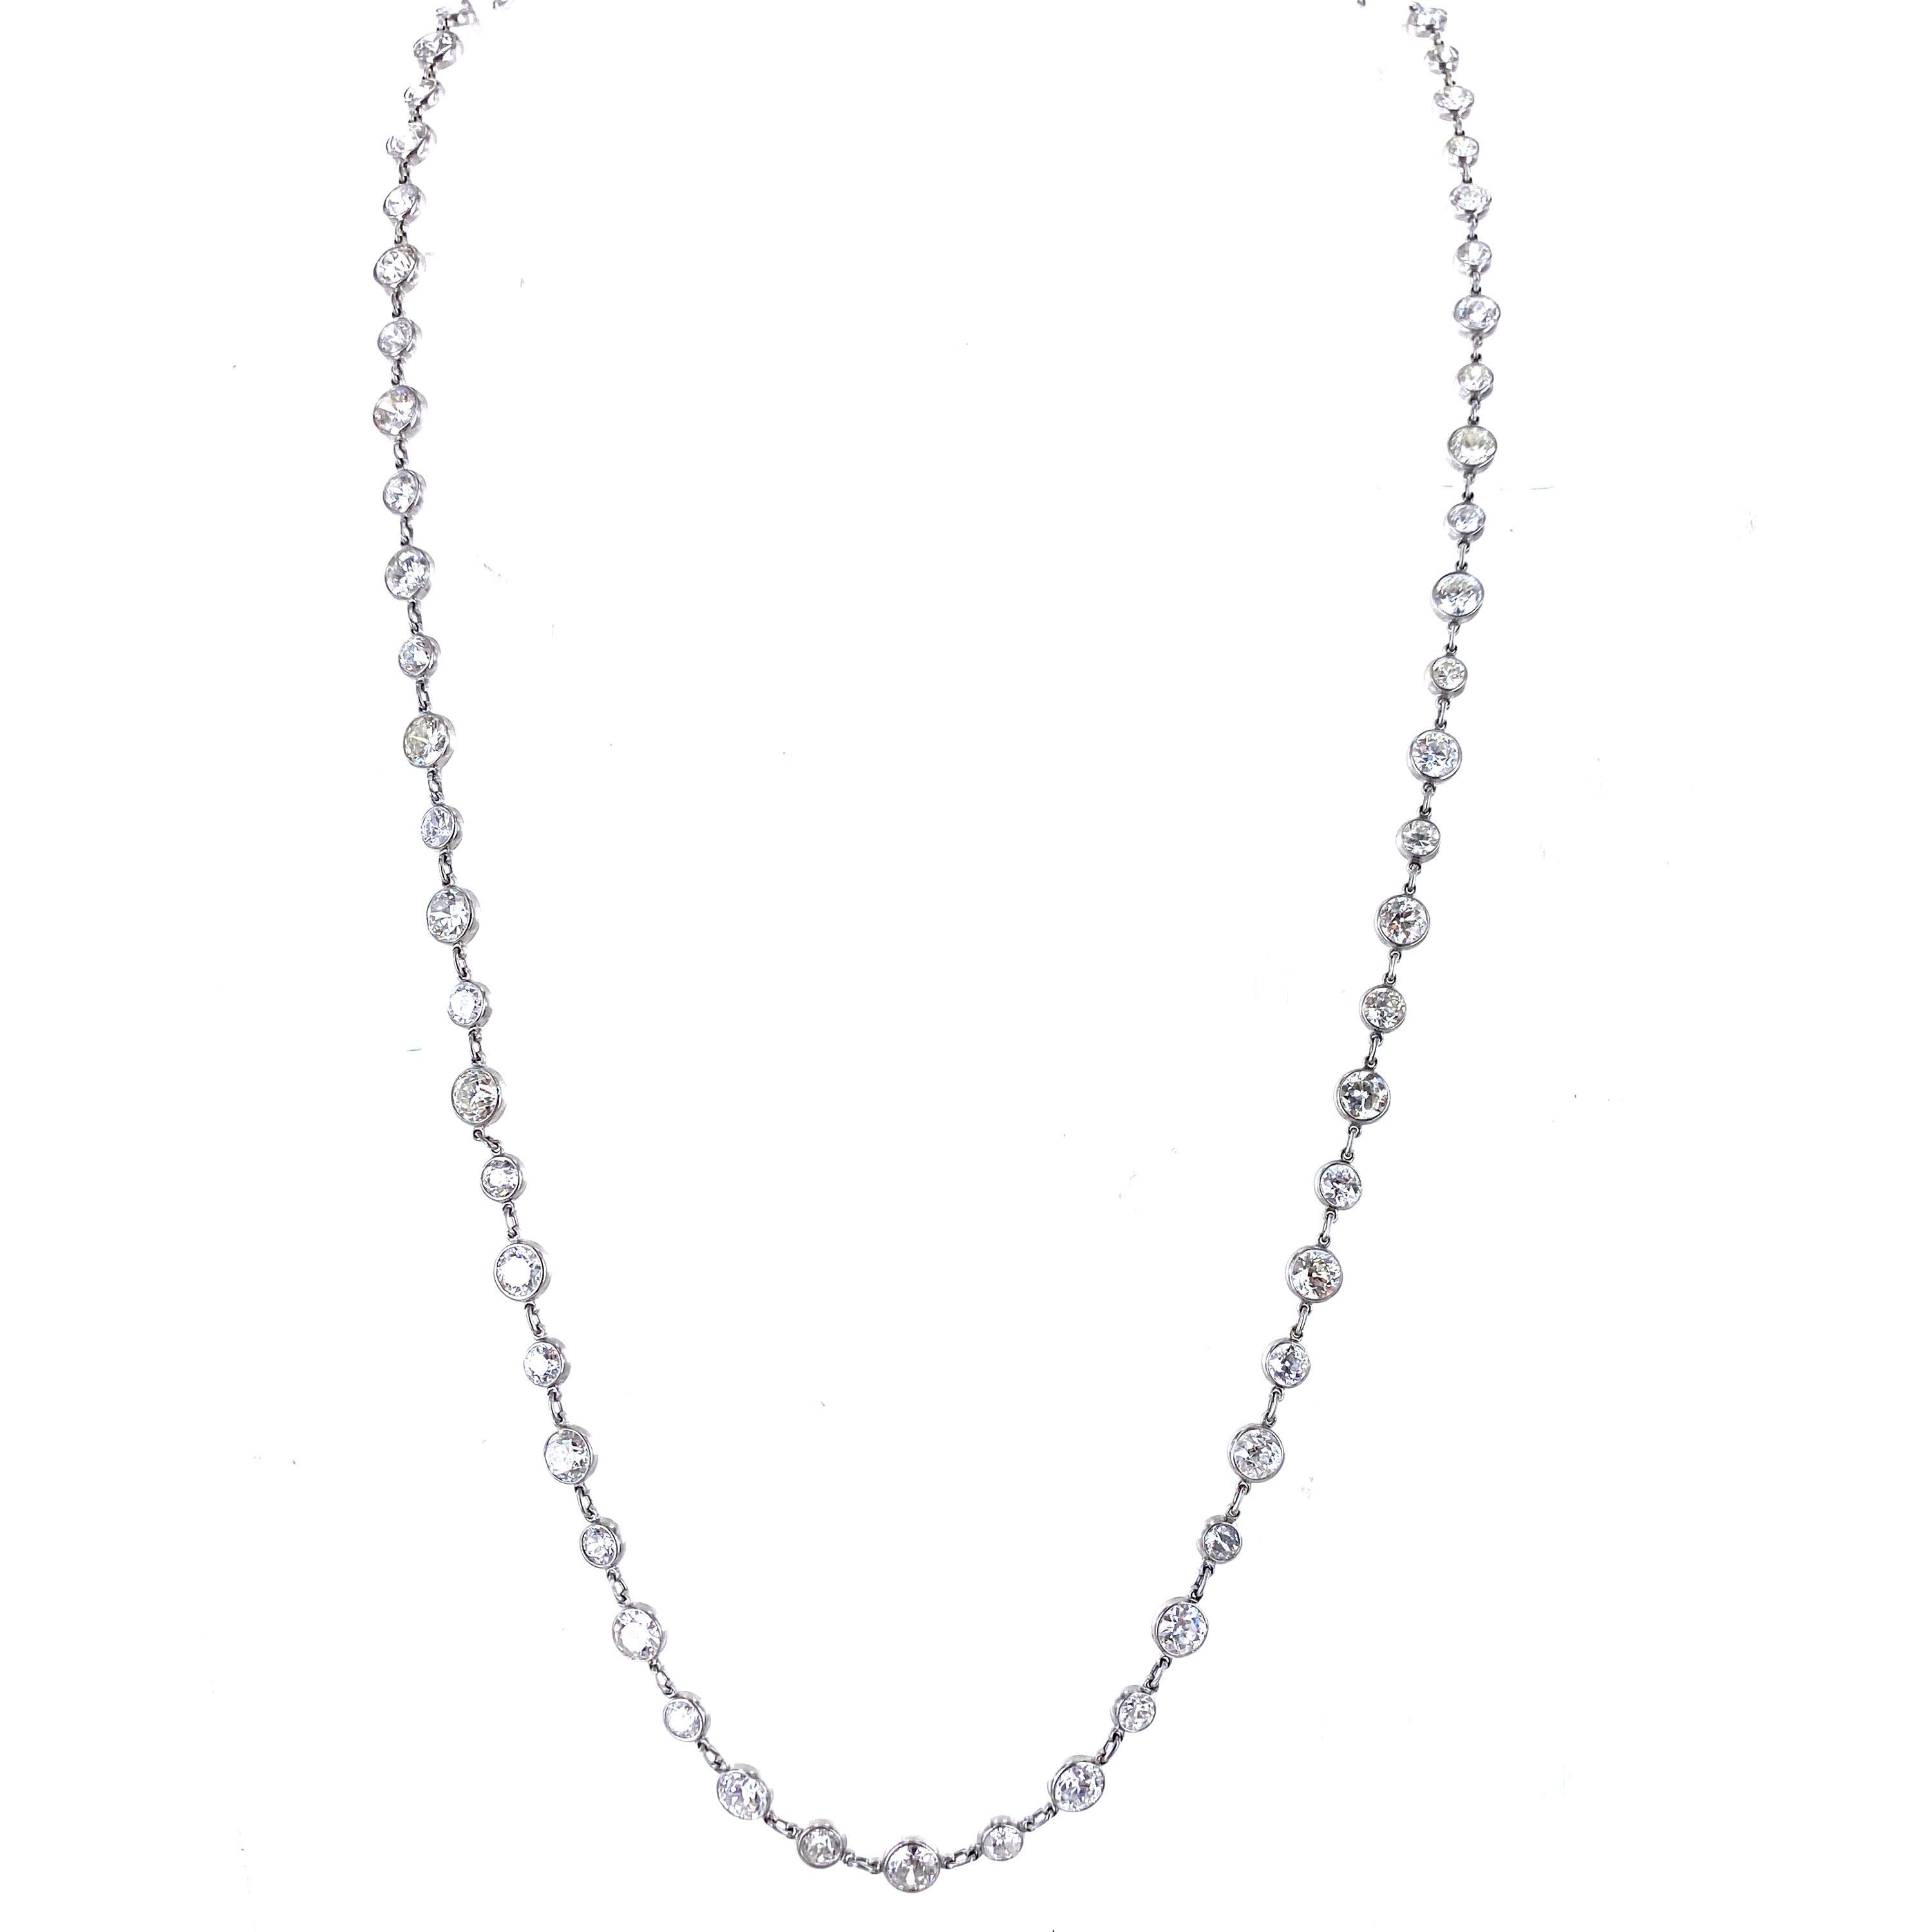 Art Deco 27 Carat Old European Cut Diamond by Yard Platinum Chain Necklace 40 Inches